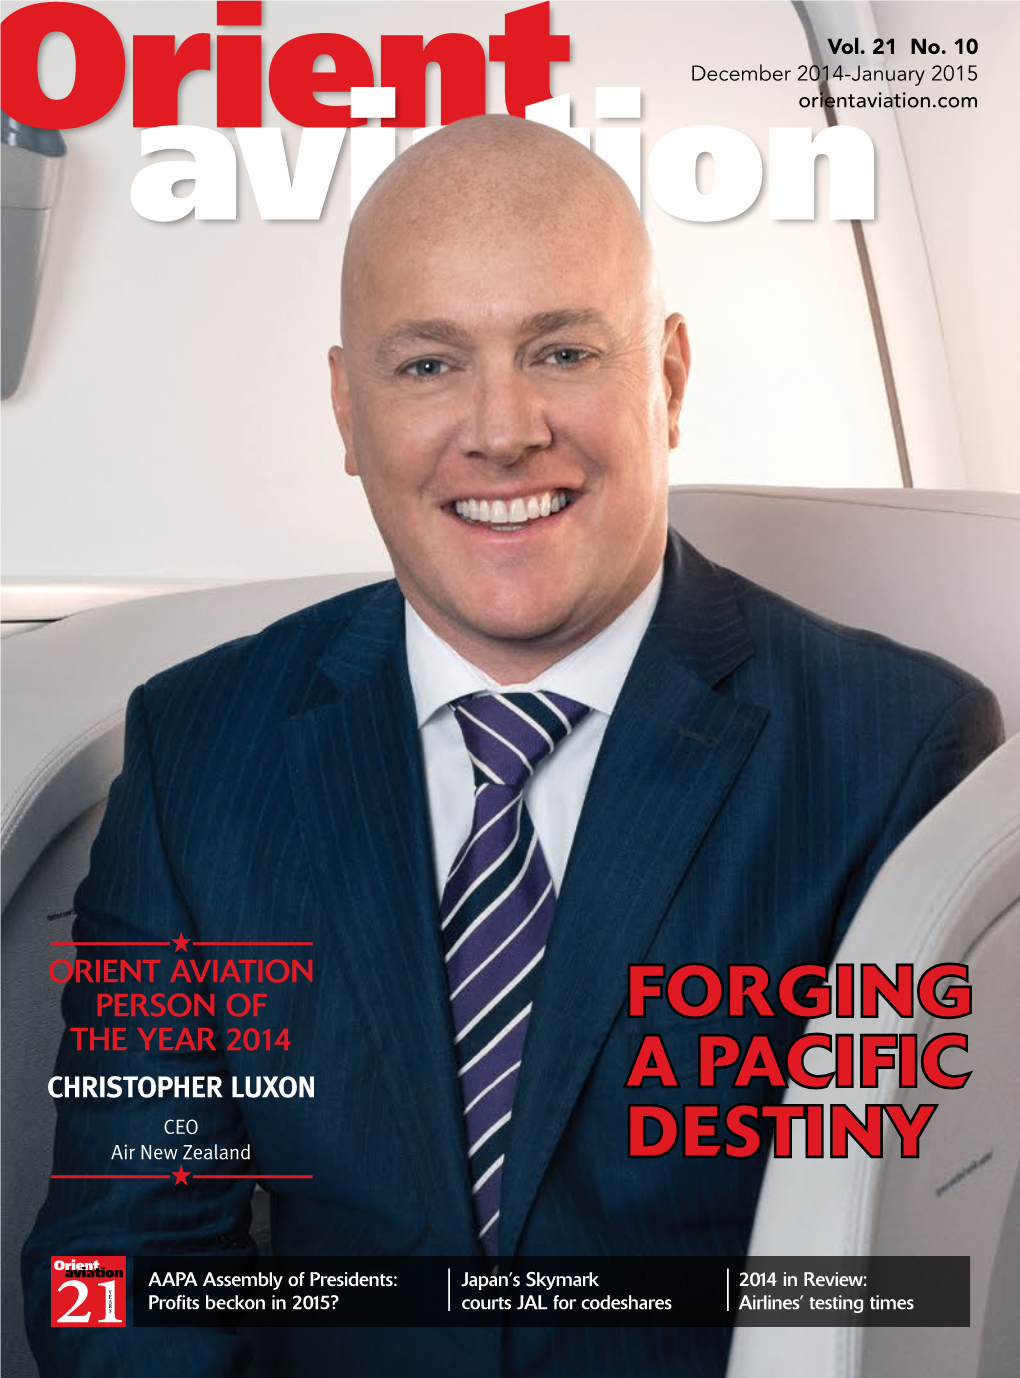 CHRISTOPHER LUXON a PACIFIC CEO Air New Zealand DESTINY